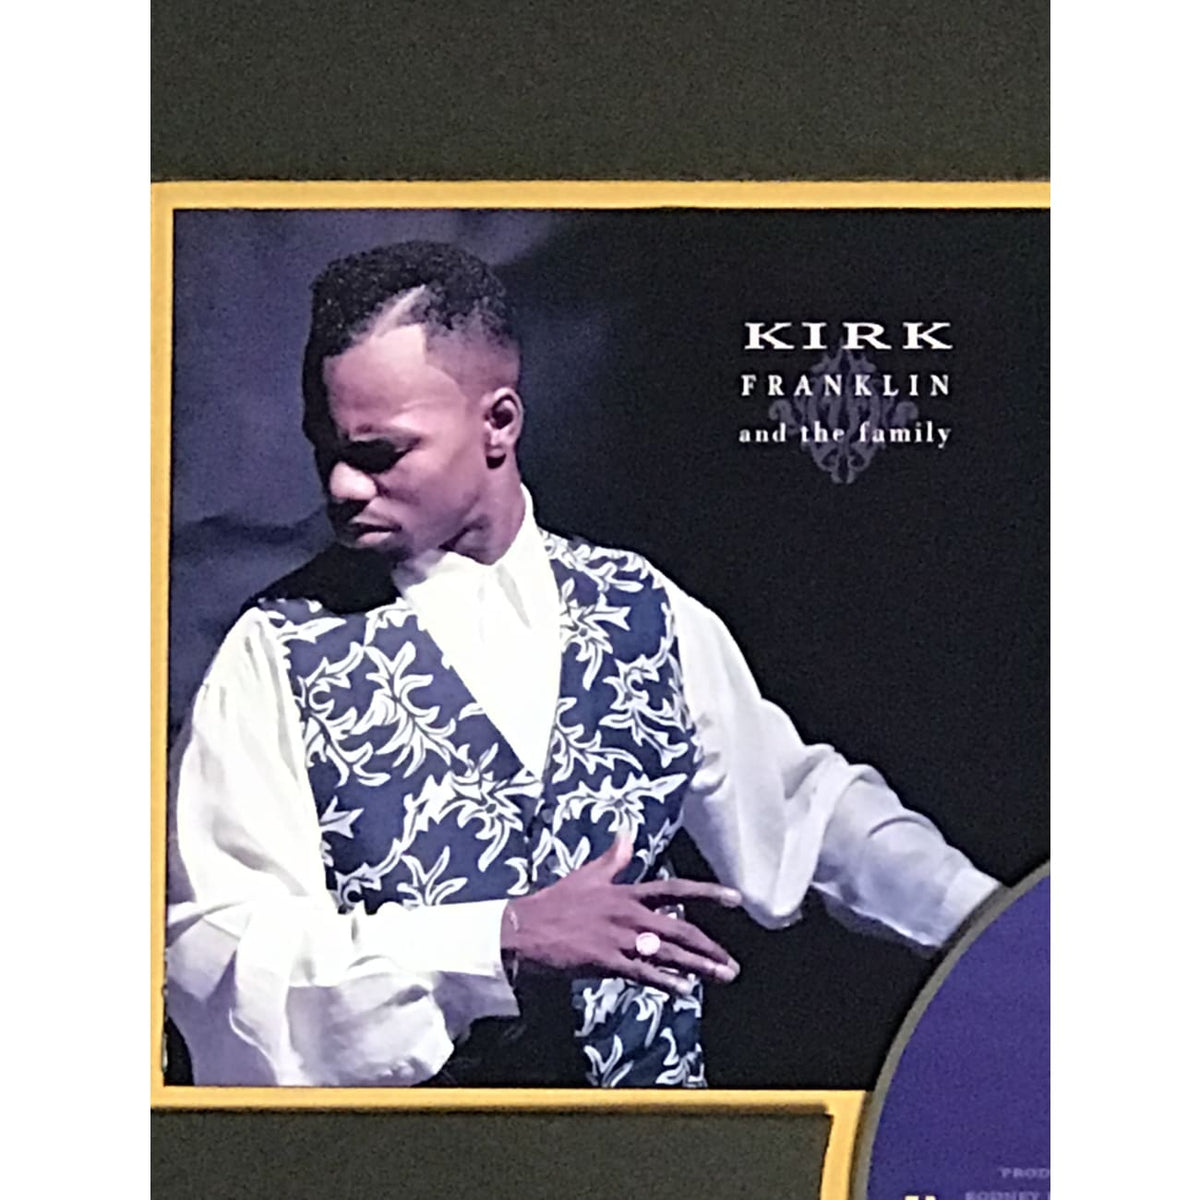 kirk franklin and the family R&B Soul 品質は非常に良い - 洋楽